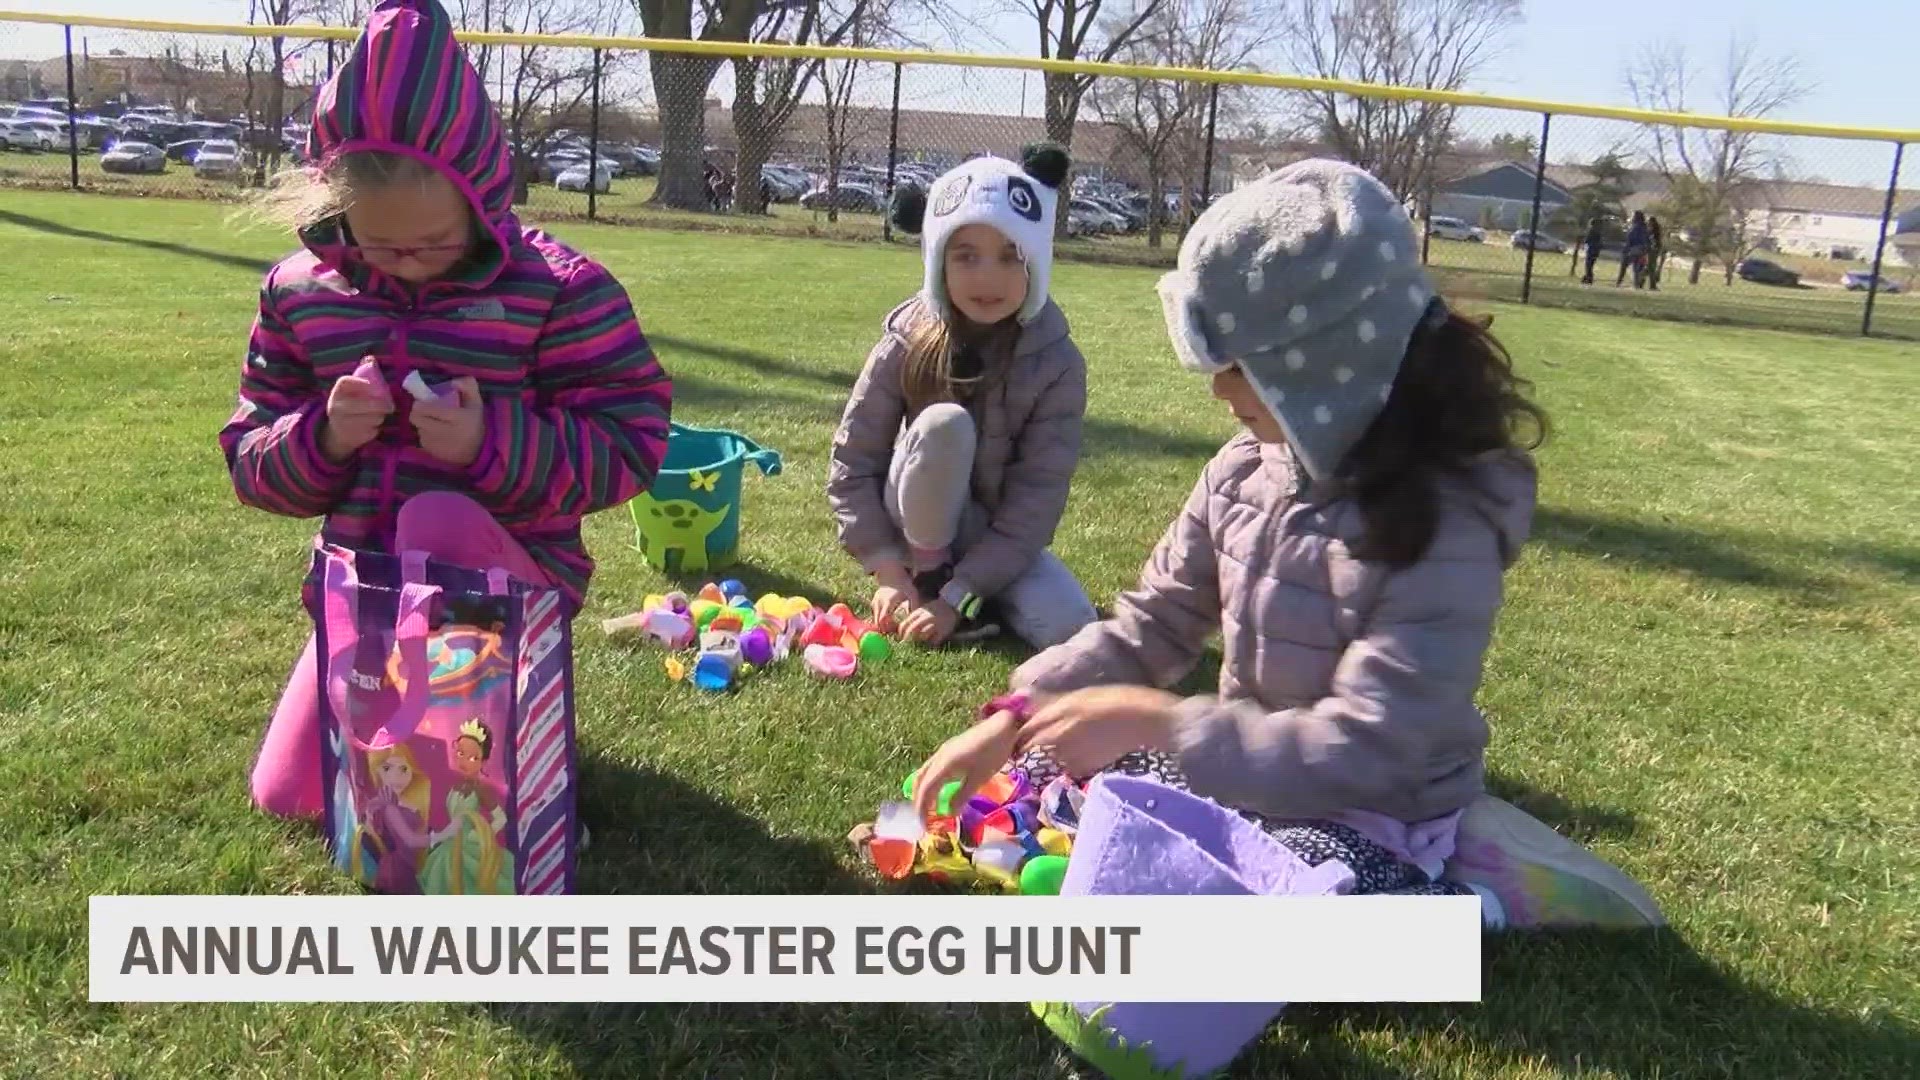 The hunt featured three different age groups up to 10-years-old, as well as thousands of Easter eggs and pieces of candy.